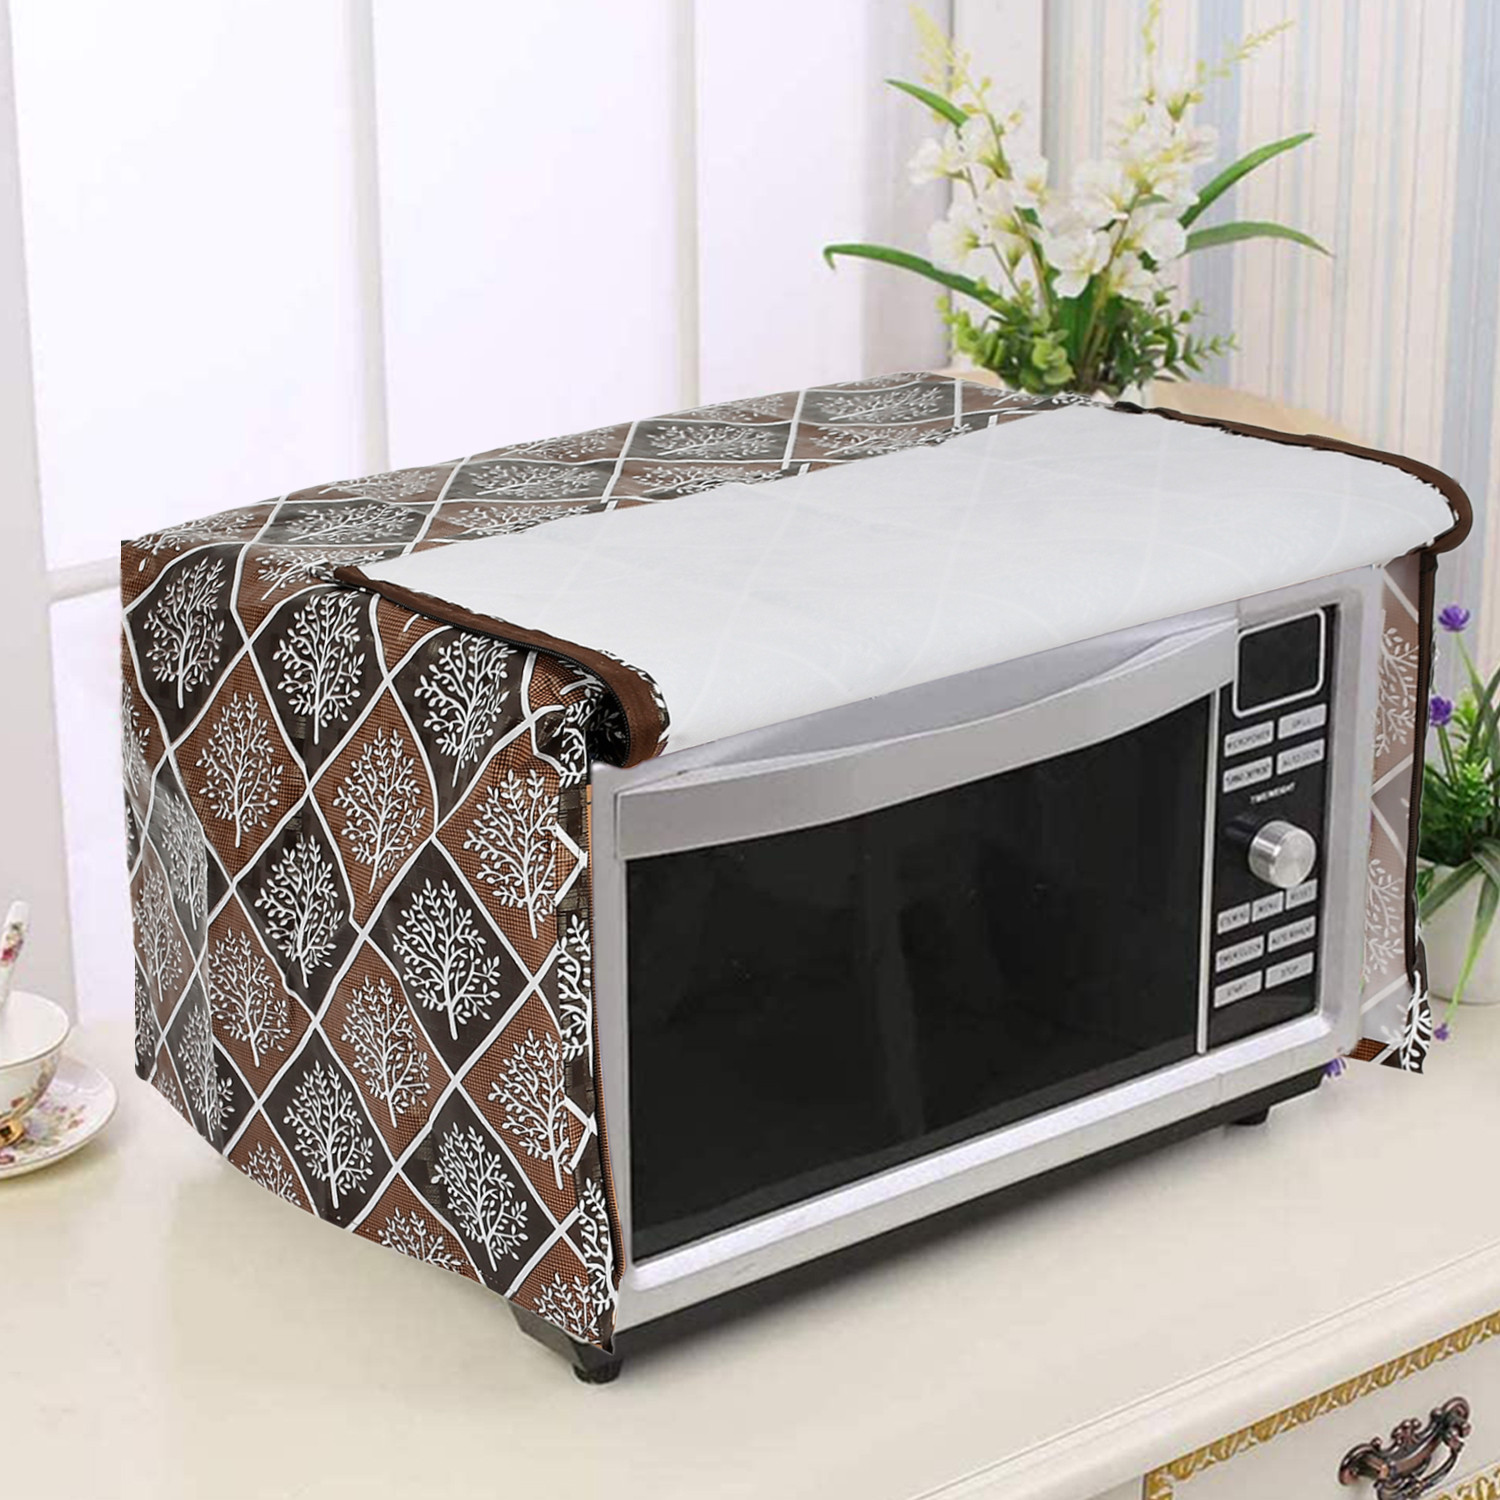 Kuber Industries PVC Tree Printed Microwave Oven Cover, Dustproof Machine Protector Cover,30 Ltr. (Coffee)